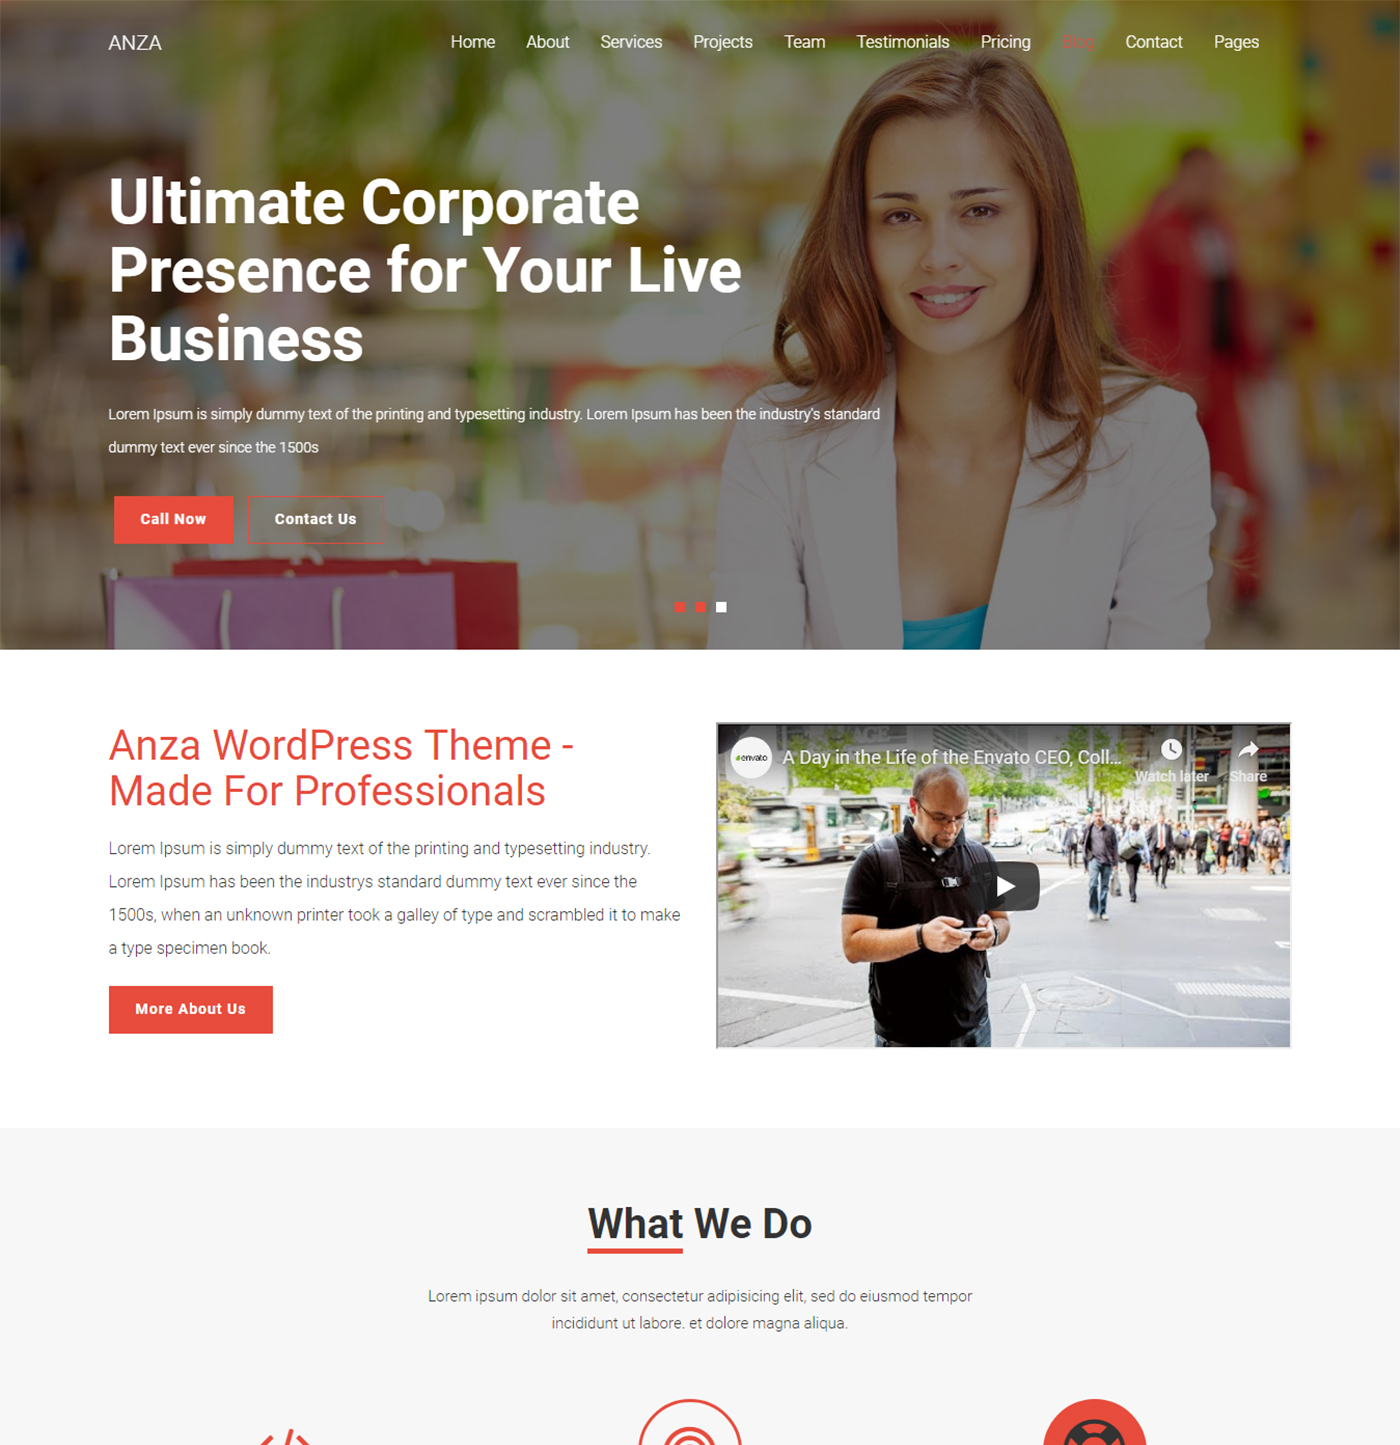 CodeTides - Exceptional WordPress Themes and Plugins